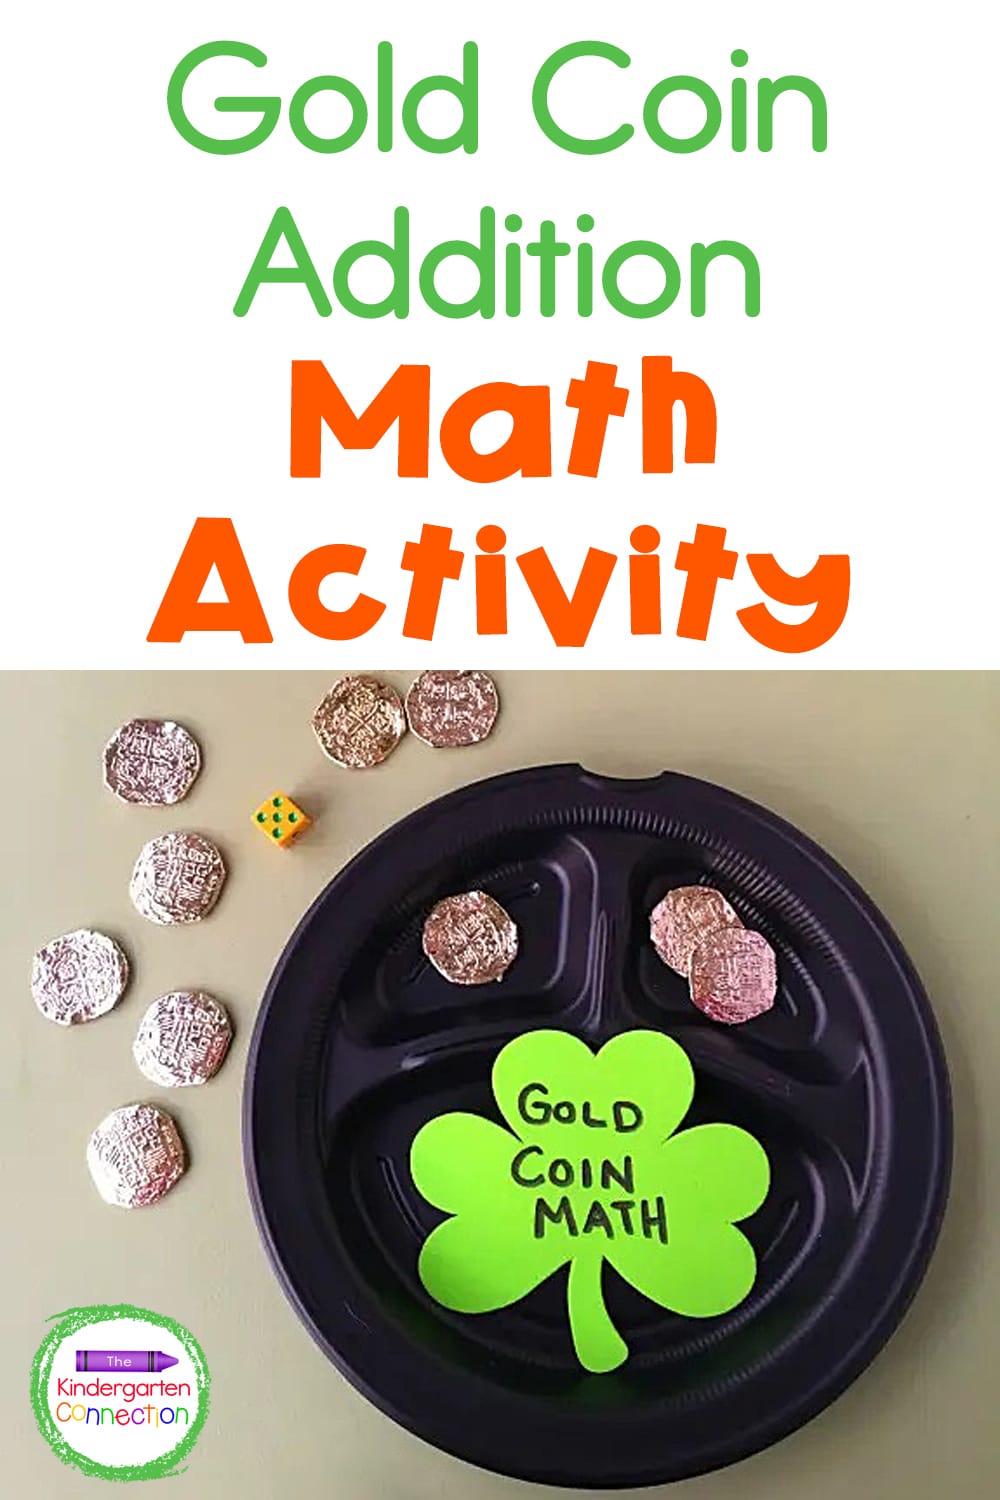 This Lucky Gold Coin Addition Activity is simple to set up and would make a fun, hands-on math station for Kindergarten!